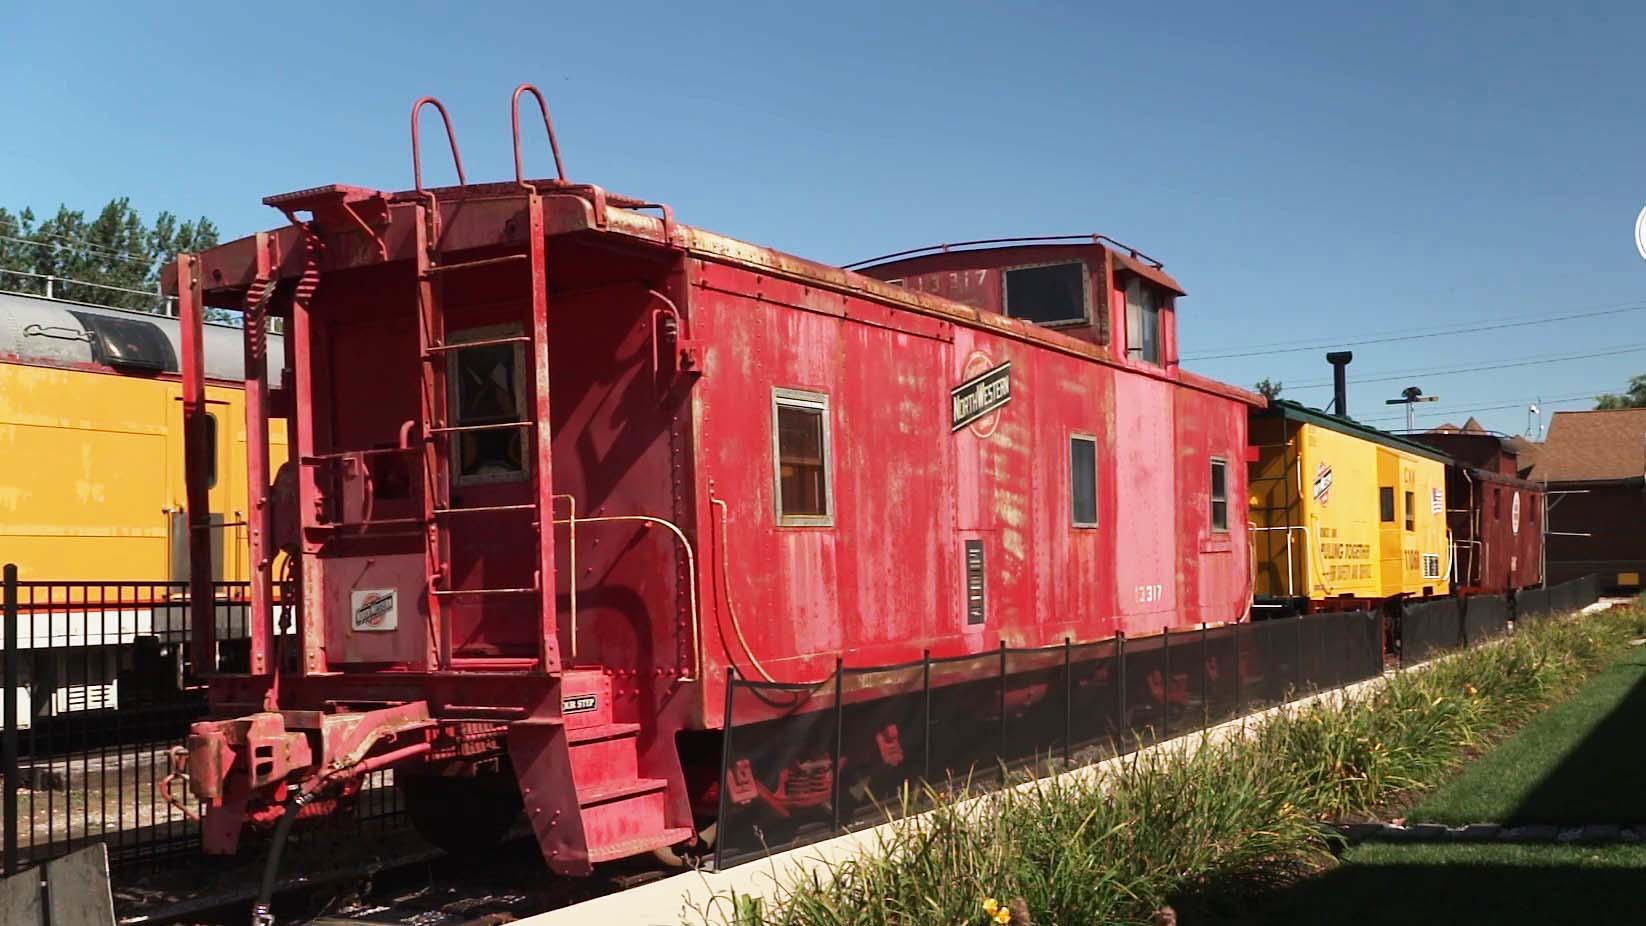 A red caboose of a train.